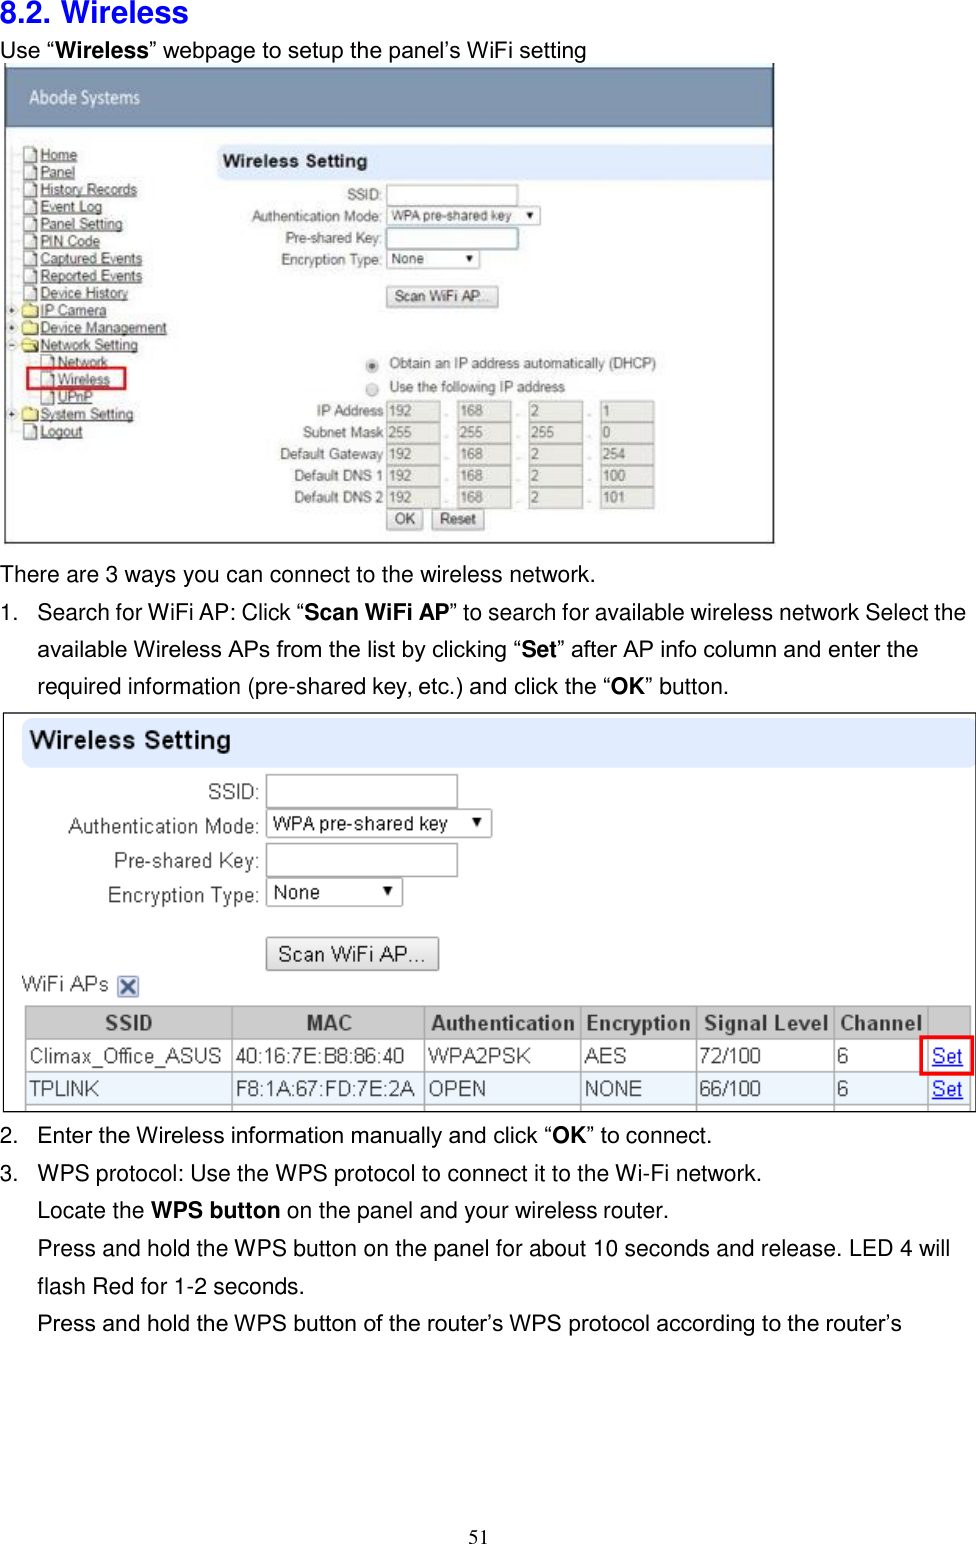 51  8.2. Wireless Use “Wireless” webpage to setup the panel’s WiFi setting                There are 3 ways you can connect to the wireless network. 1. Search for WiFi AP: Click “Scan WiFi AP” to search for available wireless network Select the available Wireless APs from the list by clicking “Set” after AP info column and enter the required information (pre-shared key, etc.) and click the “OK” button.  2. Enter the Wireless information manually and click “OK” to connect. 3. WPS protocol: Use the WPS protocol to connect it to the Wi-Fi network. Locate the WPS button on the panel and your wireless router. Press and hold the WPS button on the panel for about 10 seconds and release. LED 4 will flash Red for 1-2 seconds. Press and hold the WPS button of the router’s WPS protocol according to the router’s 